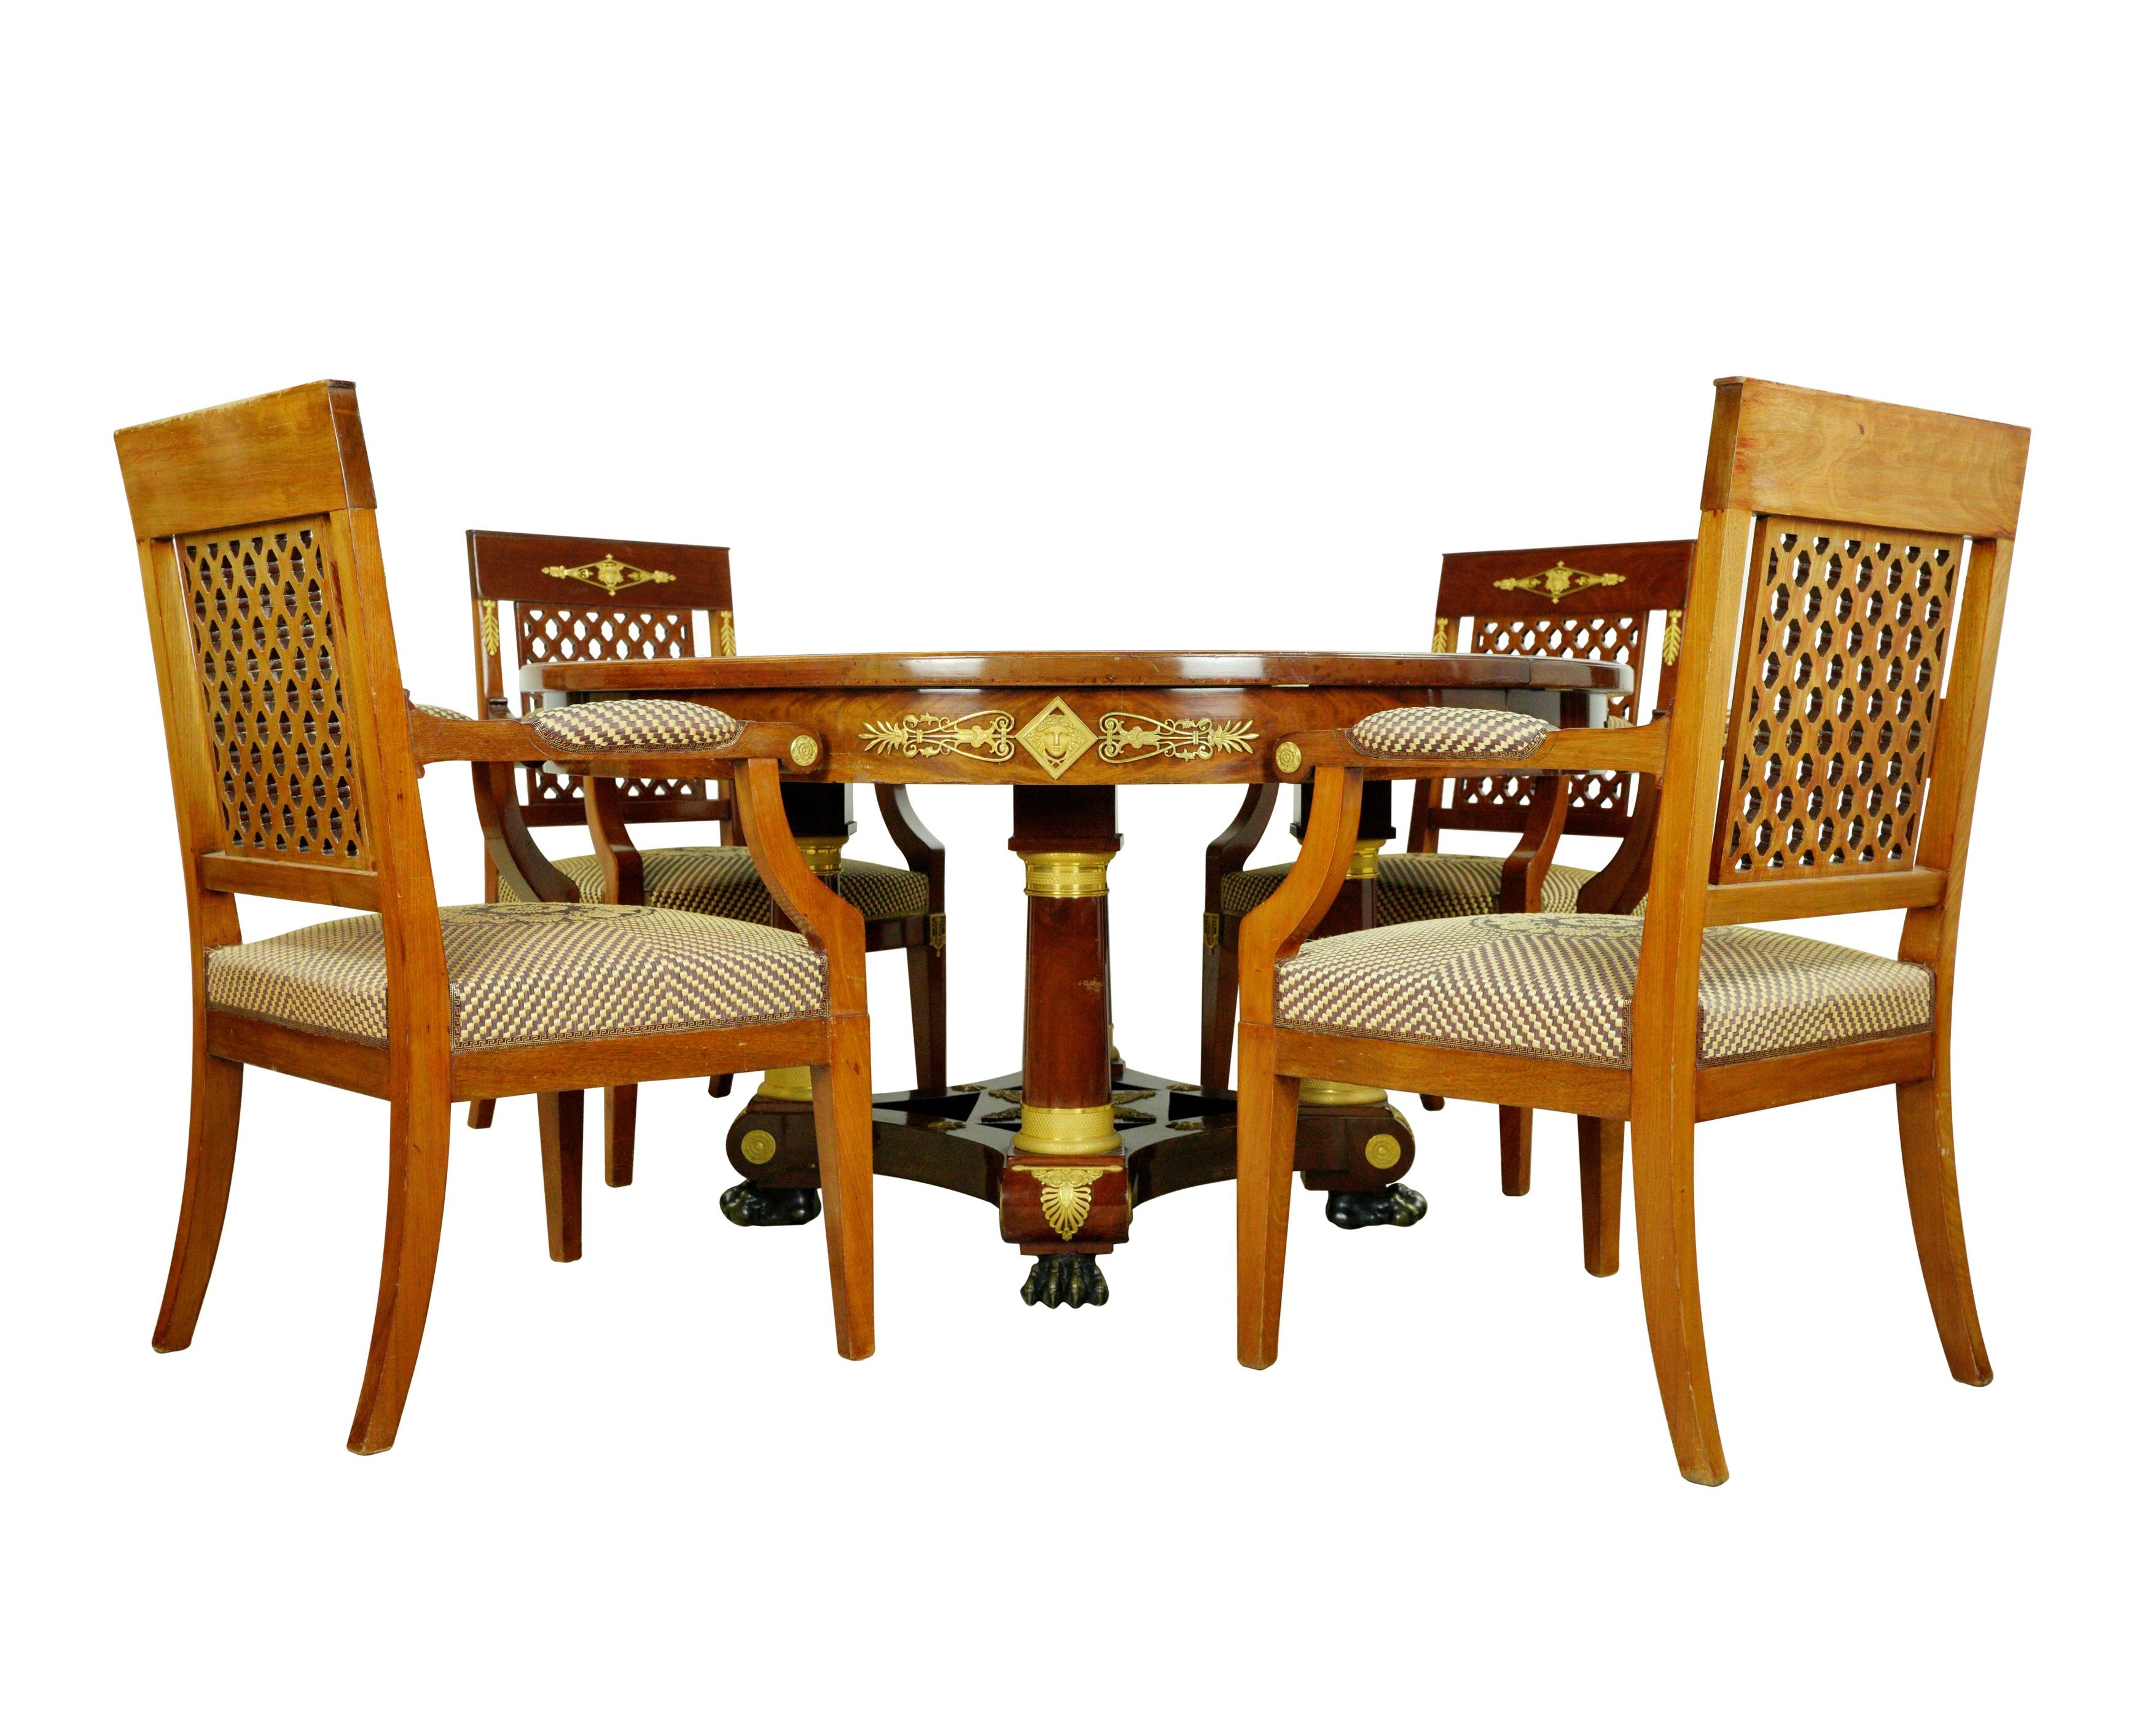 This exquisite furniture piece set from an estate in Greenwich, Connecticut. The set includes a table with four leaves and a total of twelve chairs, eight armless and four with arms. The chairs, crafted from medium-tone wood with lattice backs,